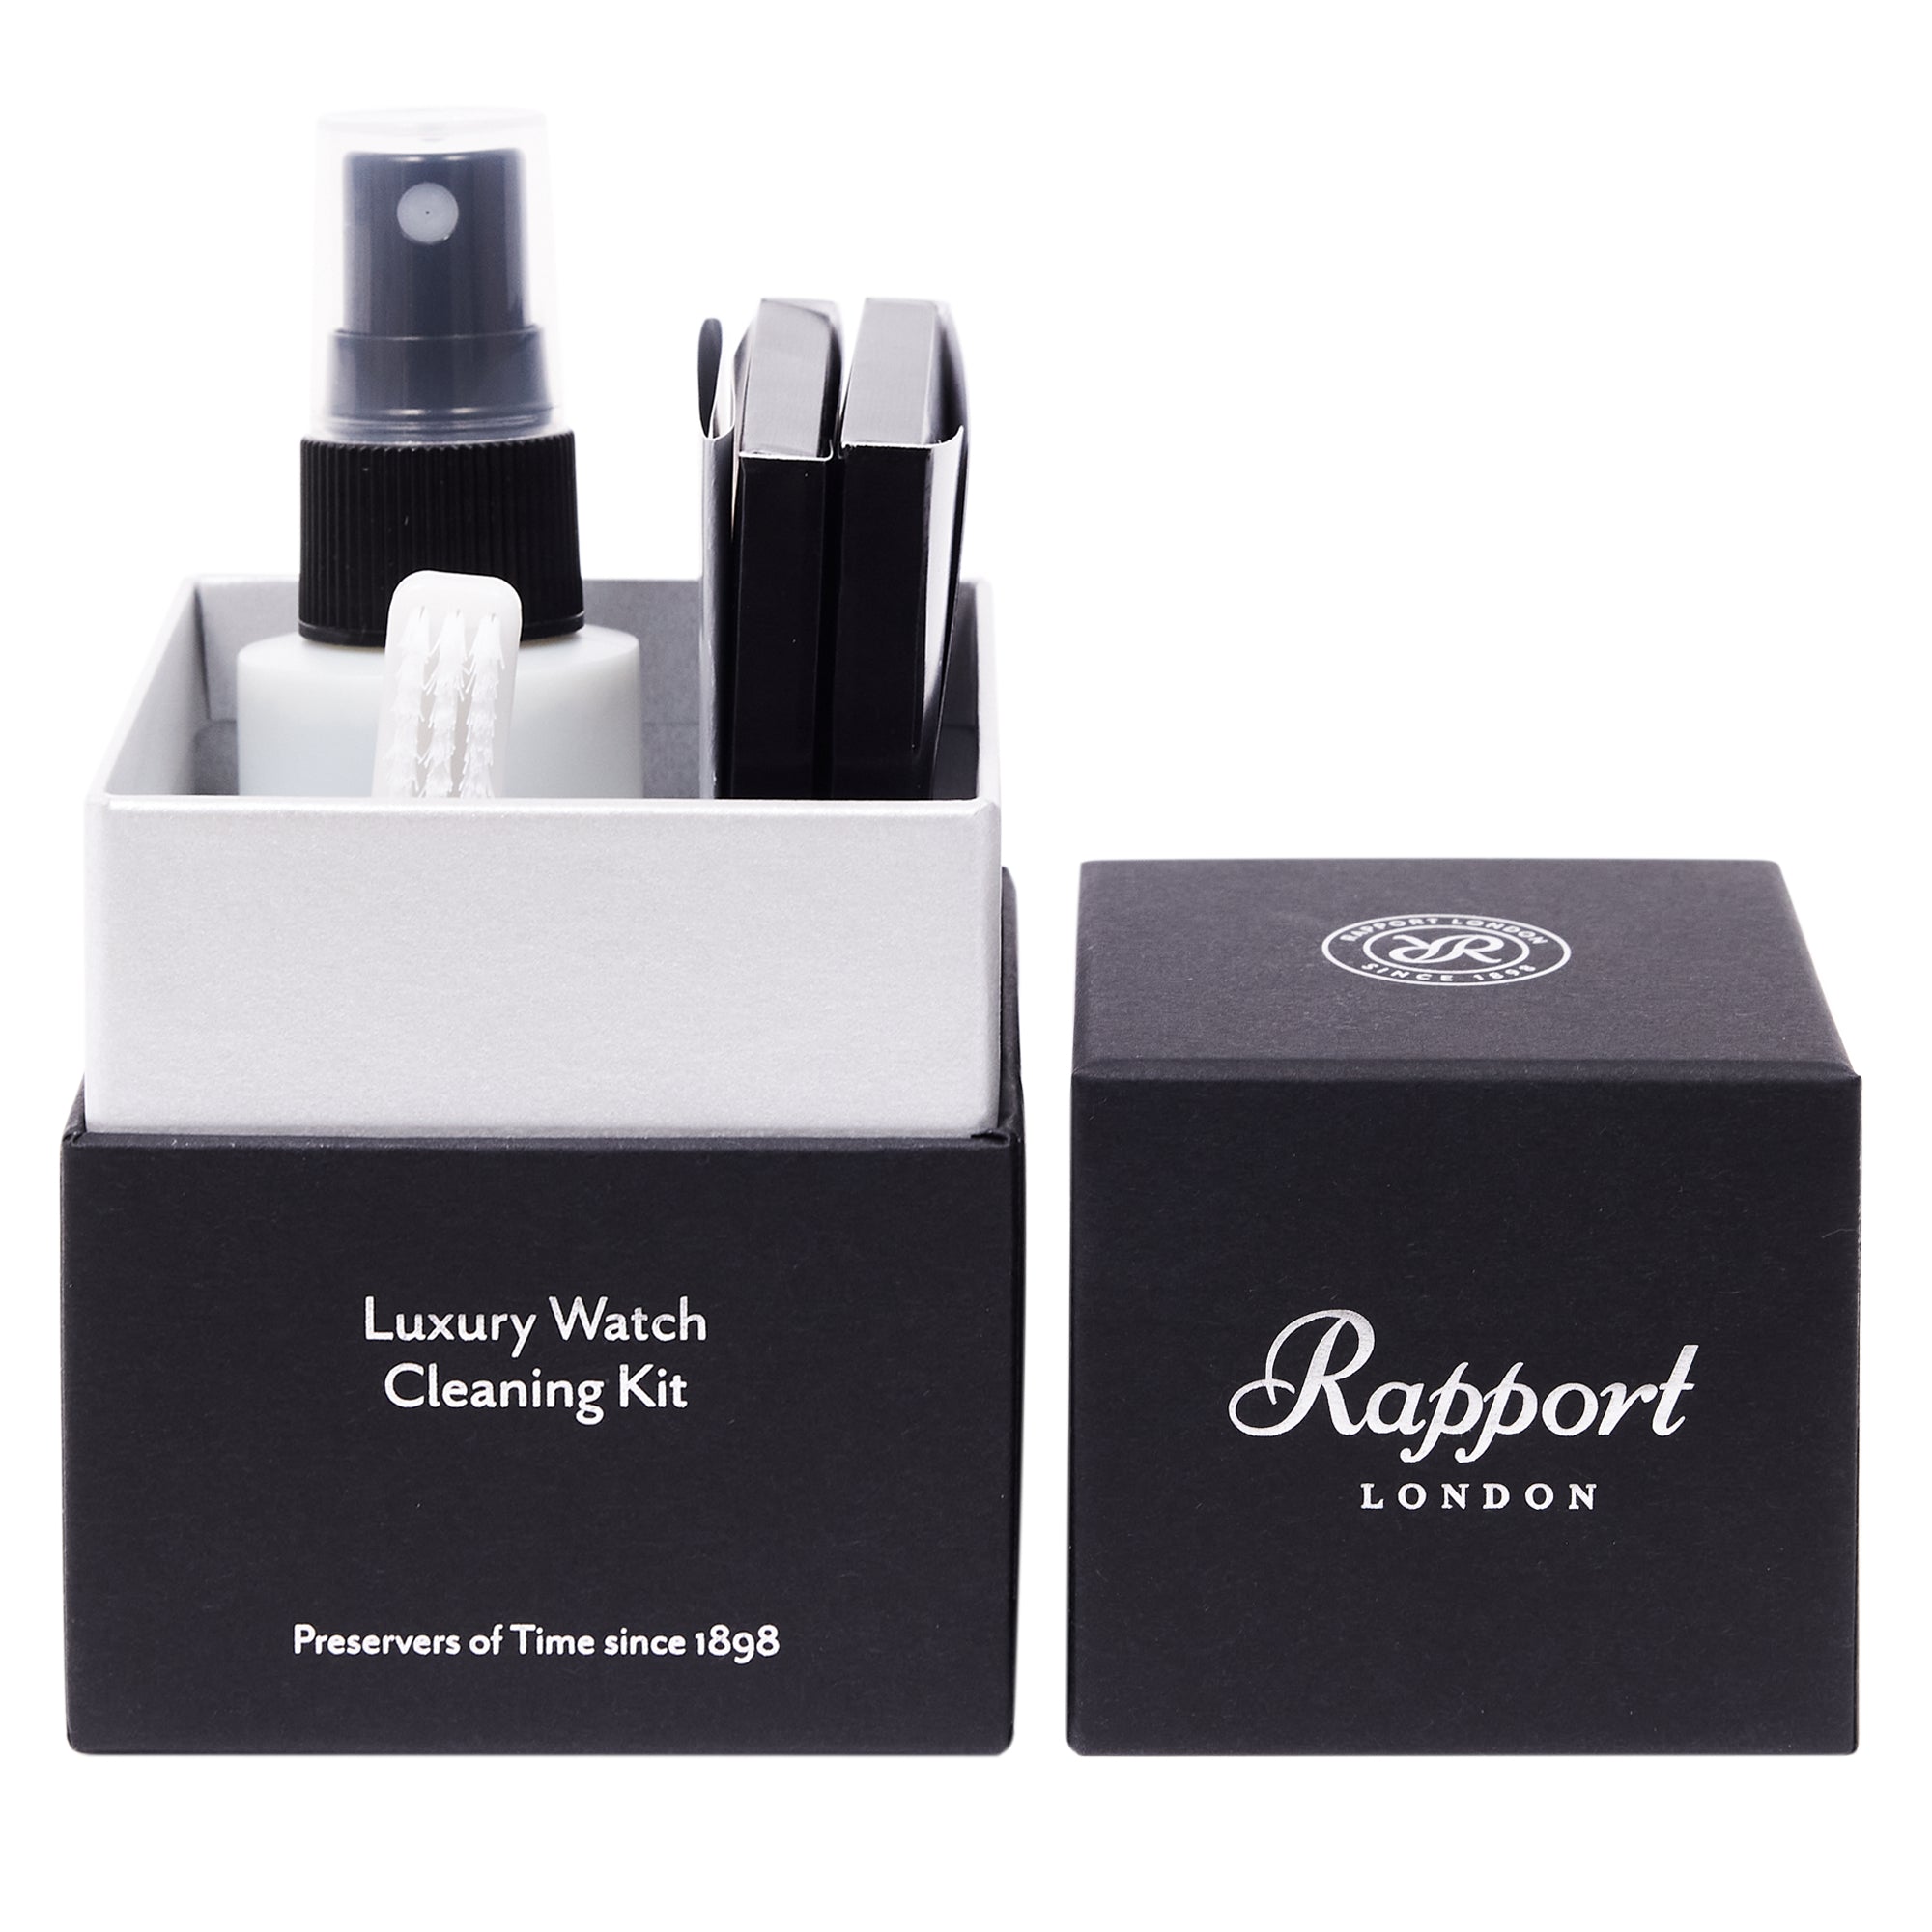 Complimentary Luxury Watch Cleaning Kit